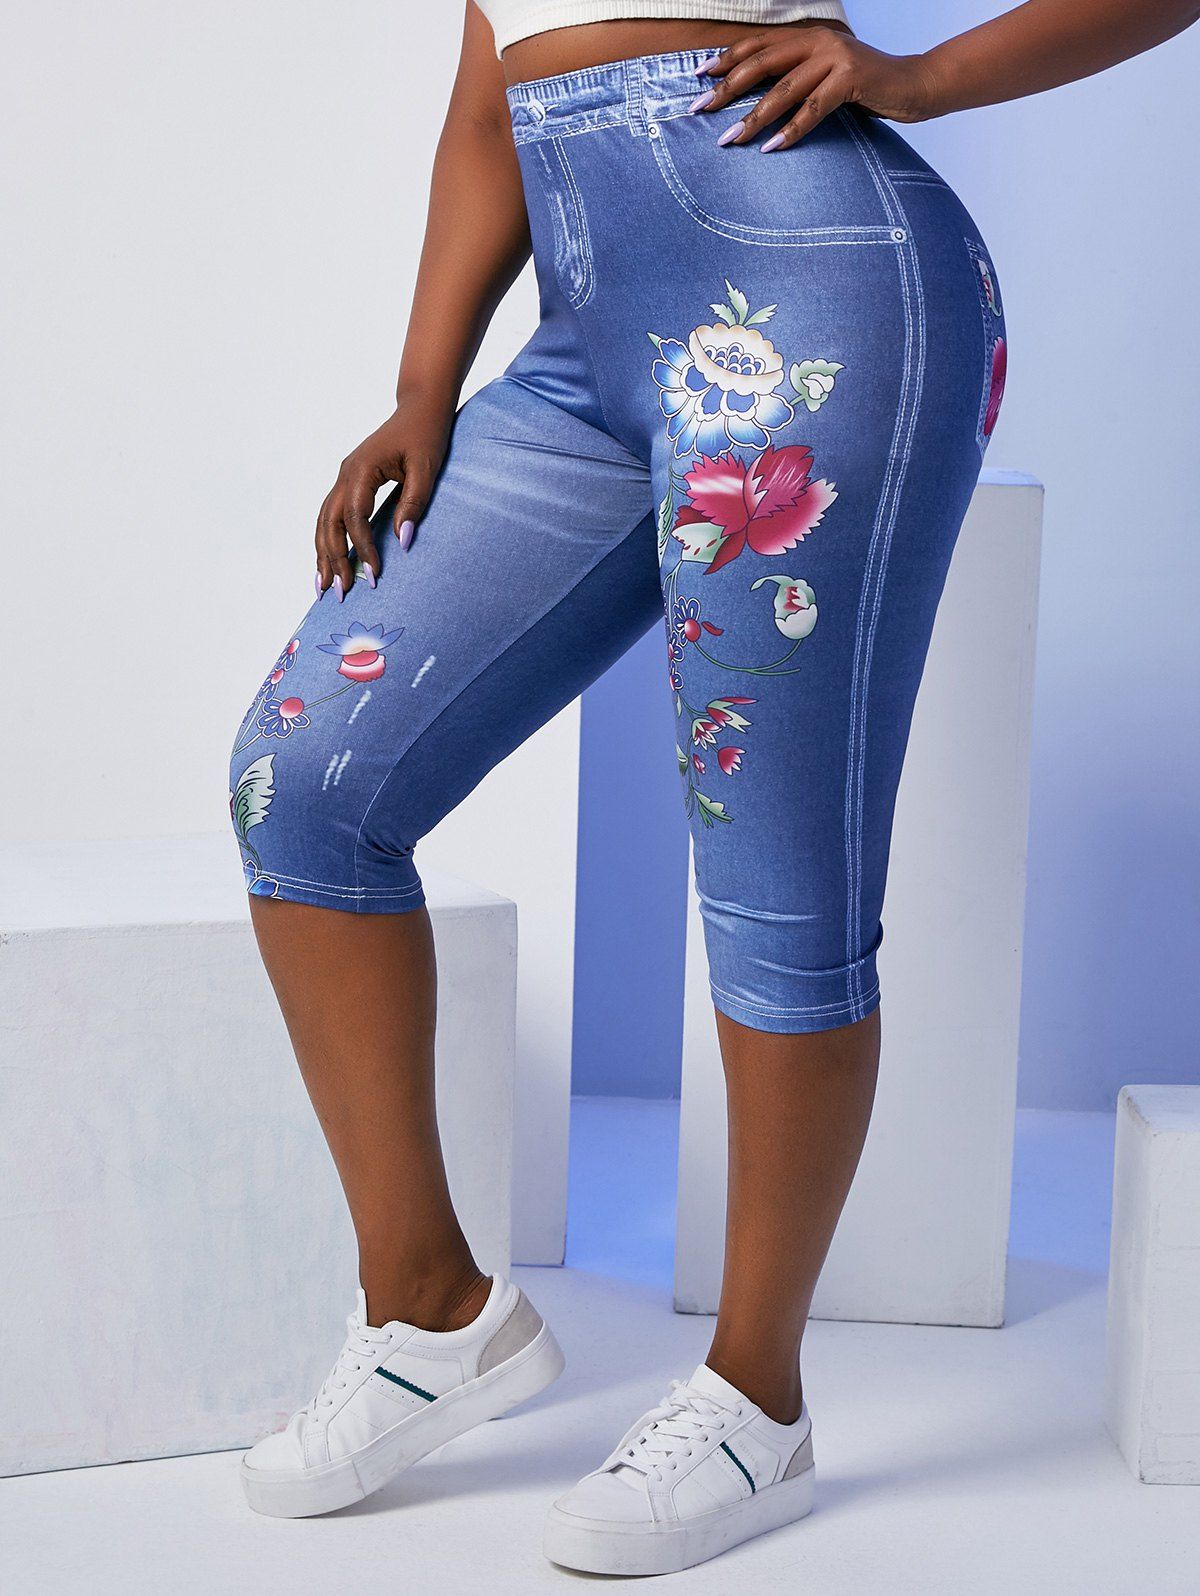 Plus Size Wildflower 3D Jean Print High Rise Cropped Jeggings - BLUE 5X